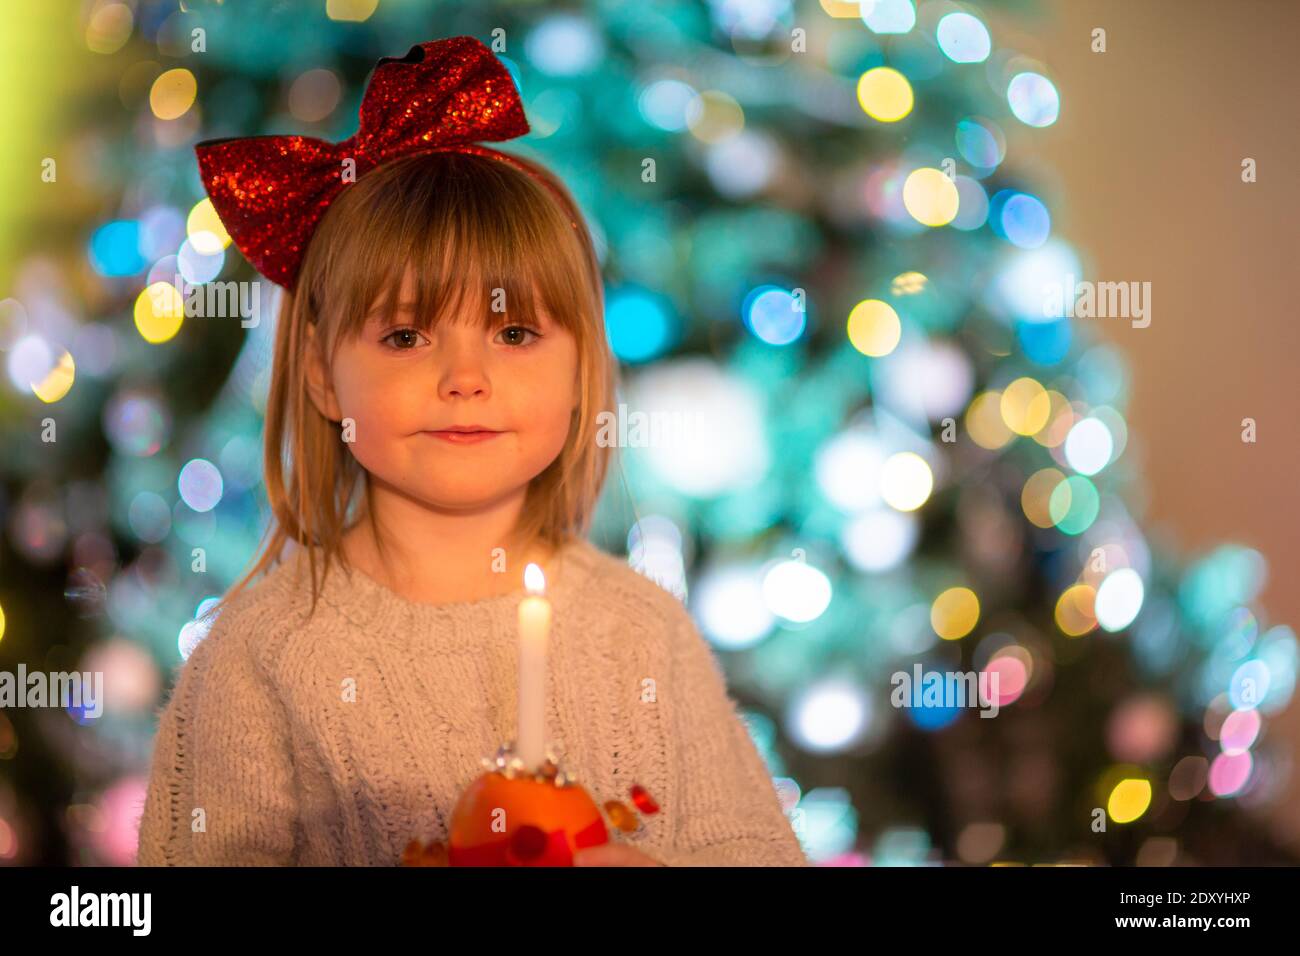 Cradley Heath, West Midlands, UK. 24th Dec, 2020. Four-year-old Hermione Hadlington stands proudly with her Christingle orange during the Christmas Eve service for children at Holy Trinity church, Cradley Heath, West Midlands. In the Christingle service the orange represents the world, the red ribbon symbolises the love and blood of Christ, the sweets represent all of God's creations, and the lit candle represents Jesus's light in the world, bringing hope to people living in darkness. Credit: Peter Lopeman/Alamy Live News Stock Photo